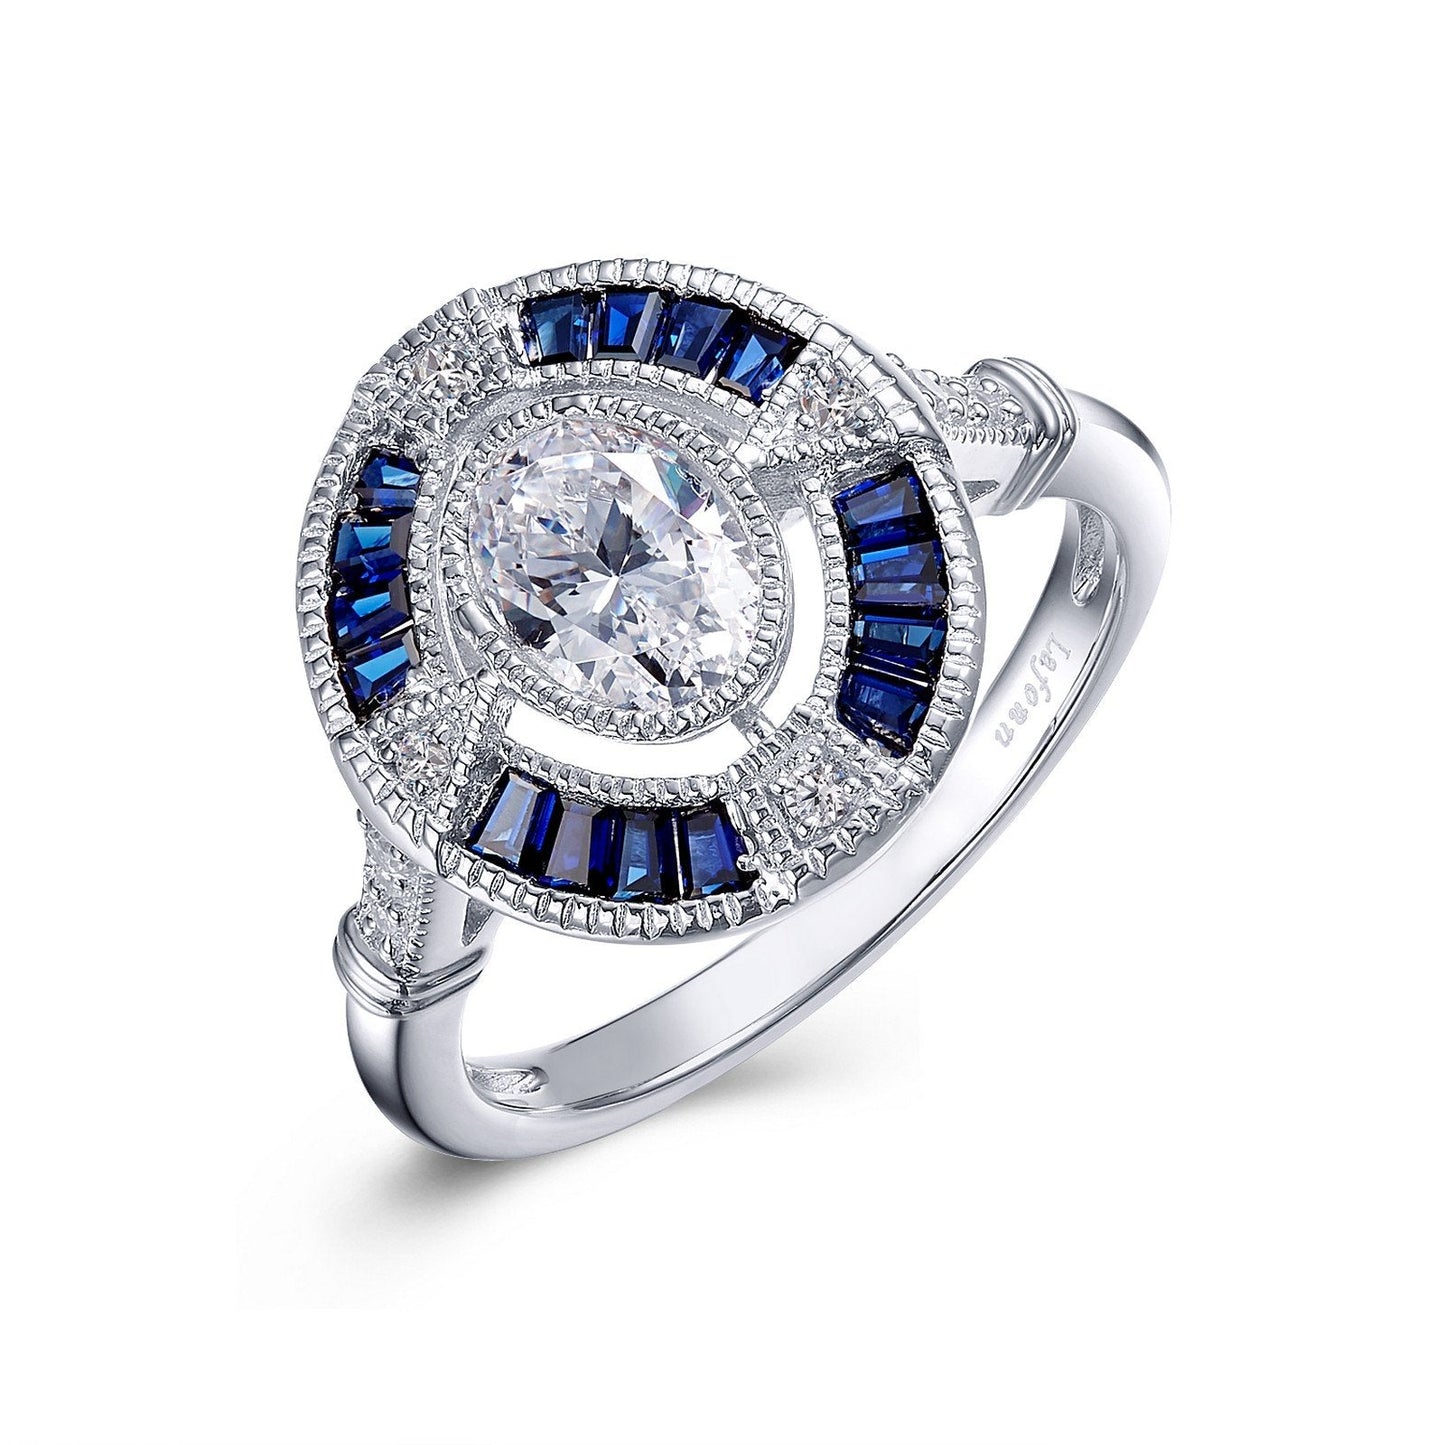 Load image into Gallery viewer, Lafonn Vintage Inspired Engagement Ring Sapphire RINGS Size 10 Platinum 2.47 CTS Approx. 15.2mm (H) x 14.5mm (W)
